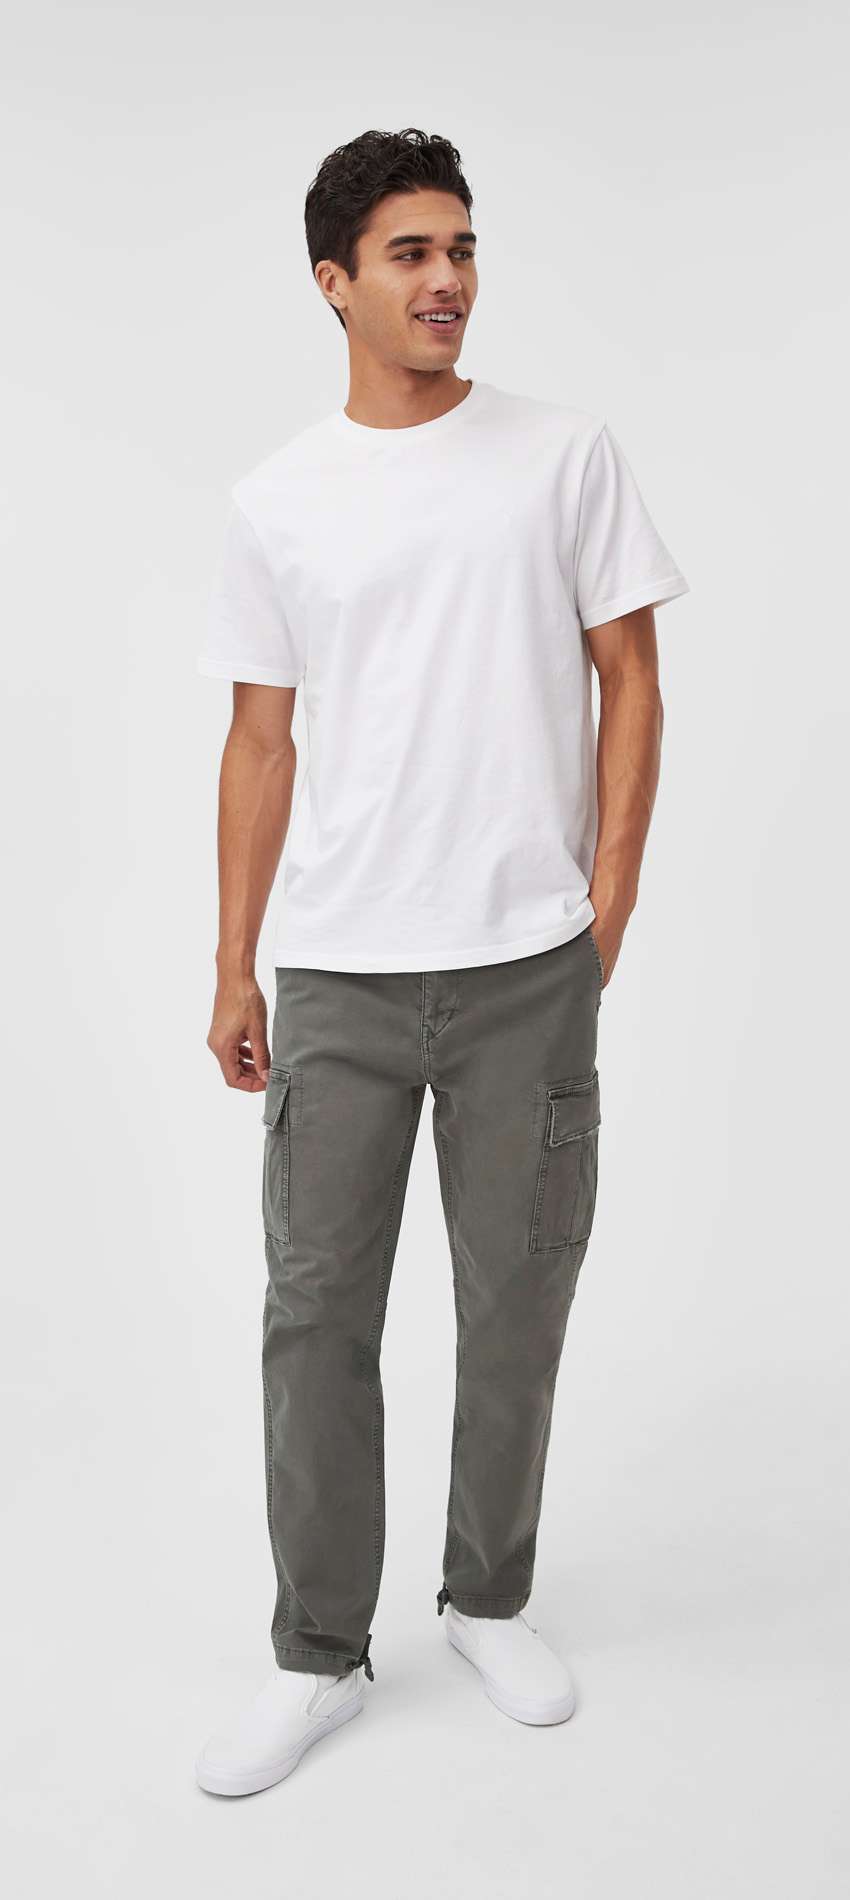 model wearing cargo pants and white t-shirt